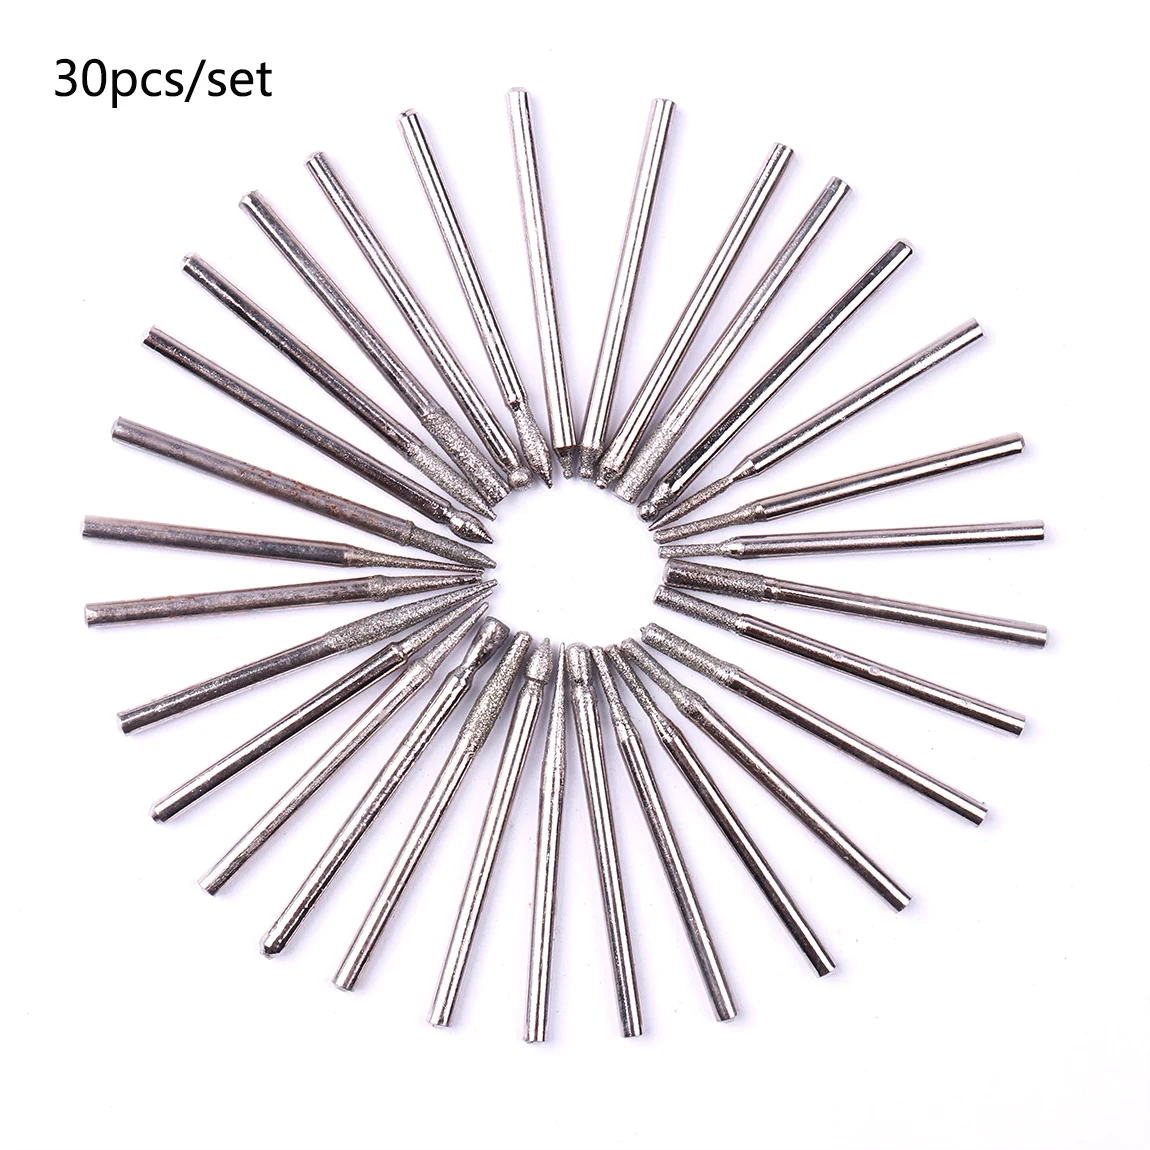 CHEERBRIGHT 30Pc Diamond Coated Cuticle Removal Nail Drill Set Rotary Grinding Burrs Glass Drill Bit DIYTool Set 5 pieces 0 5mm 3mm ball round rotary diamond burr drill bit 2 35mm shank glass carving grinding carving polishing drill bit set